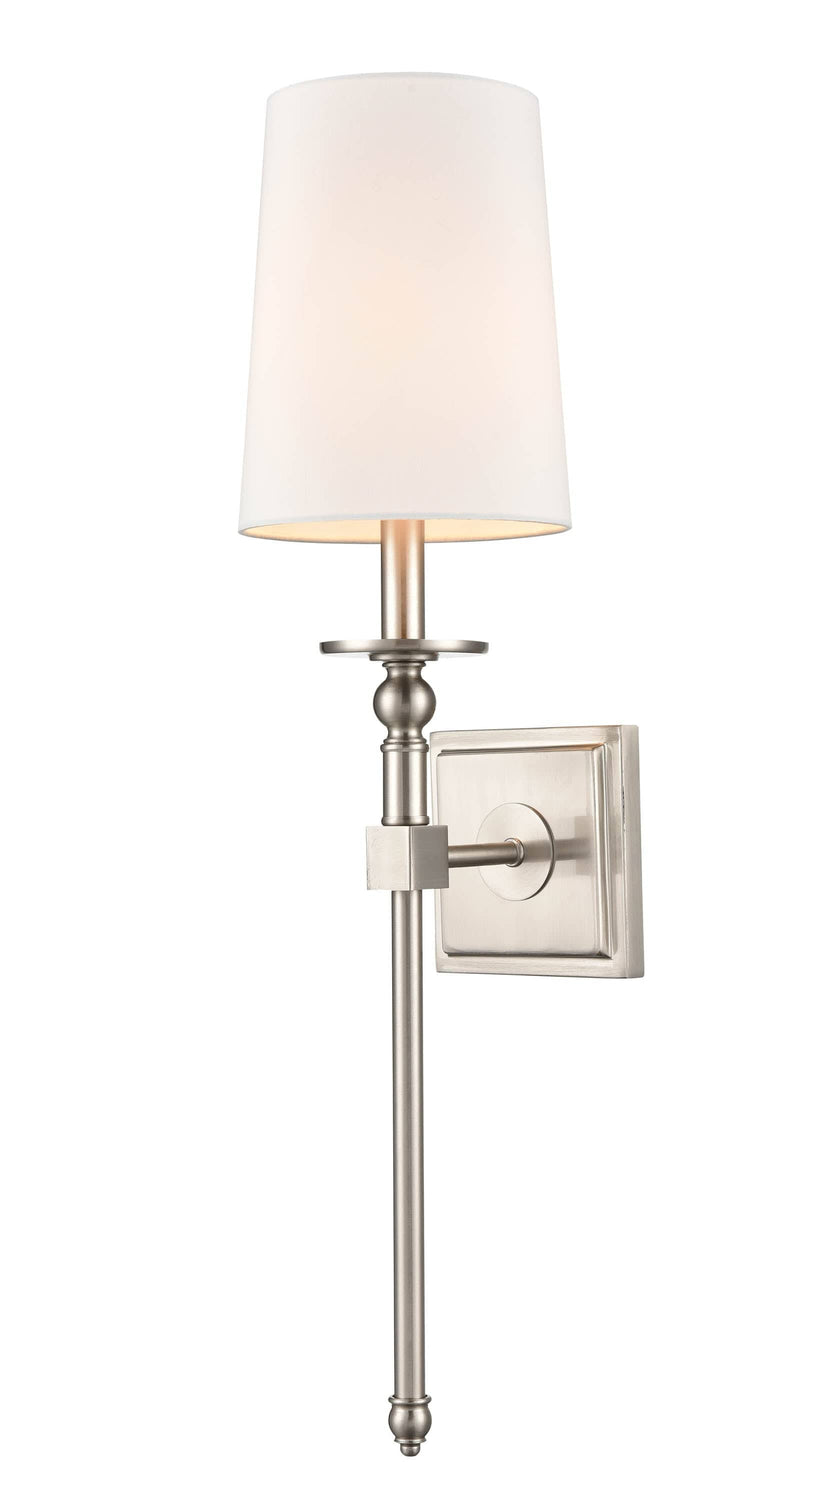 Bullet 7 Brushed Satin Nickel Sconce w/ Seedy Shade - #524A7